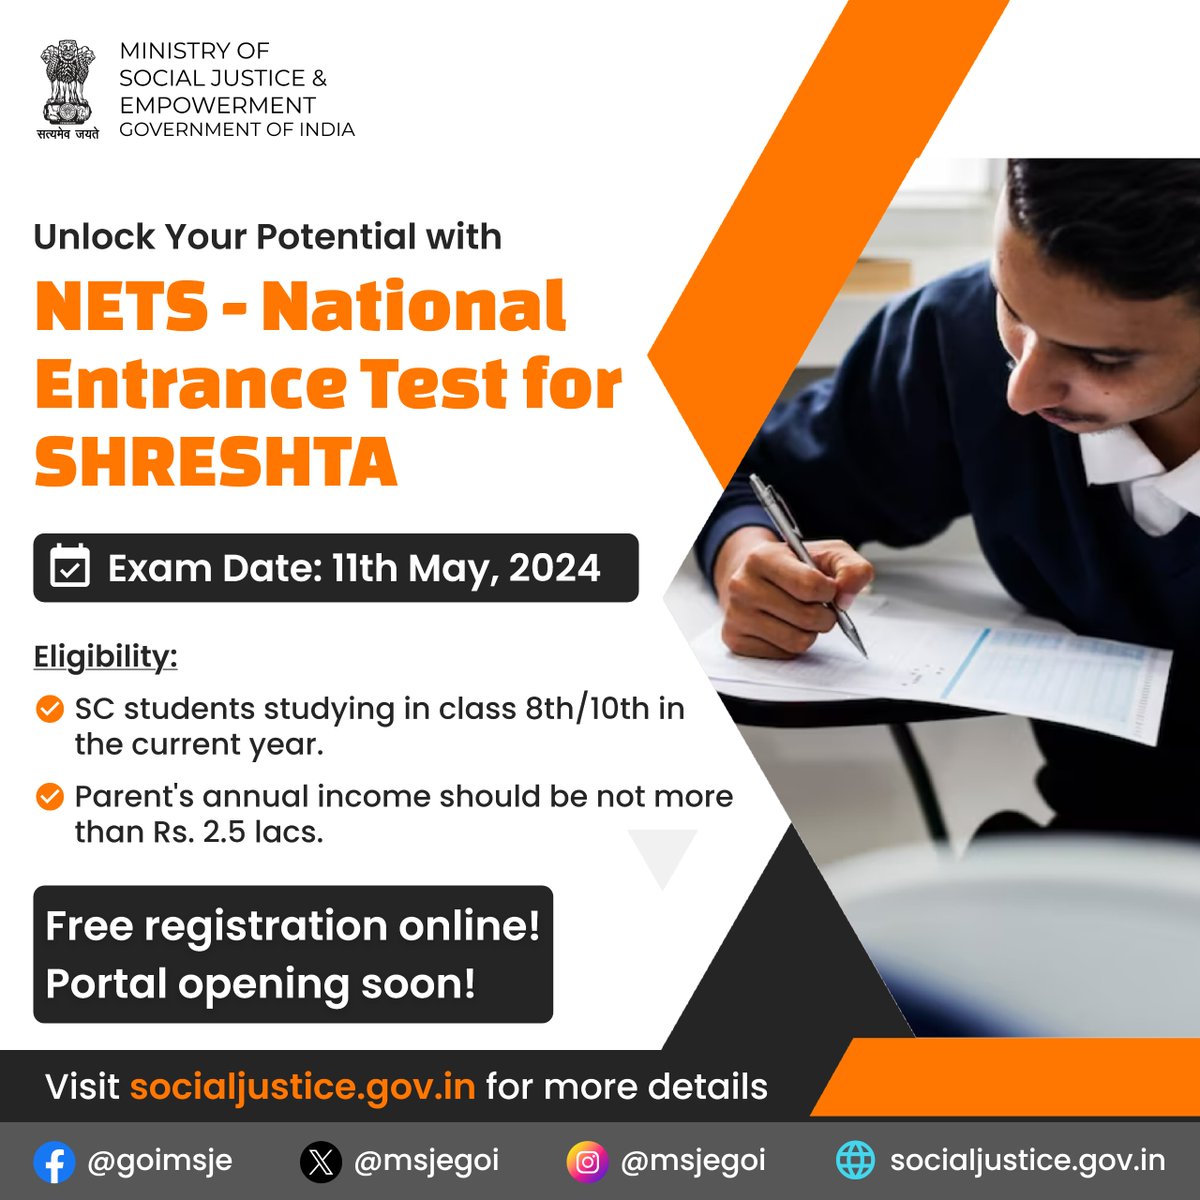 Get ready to take the National Entrance Test for SHRESHTA (NETS) on 11th May 2024. The portal will be open shortly!
#NETS2024 #EntranceTest #CountdownBegins #ShapingFutures